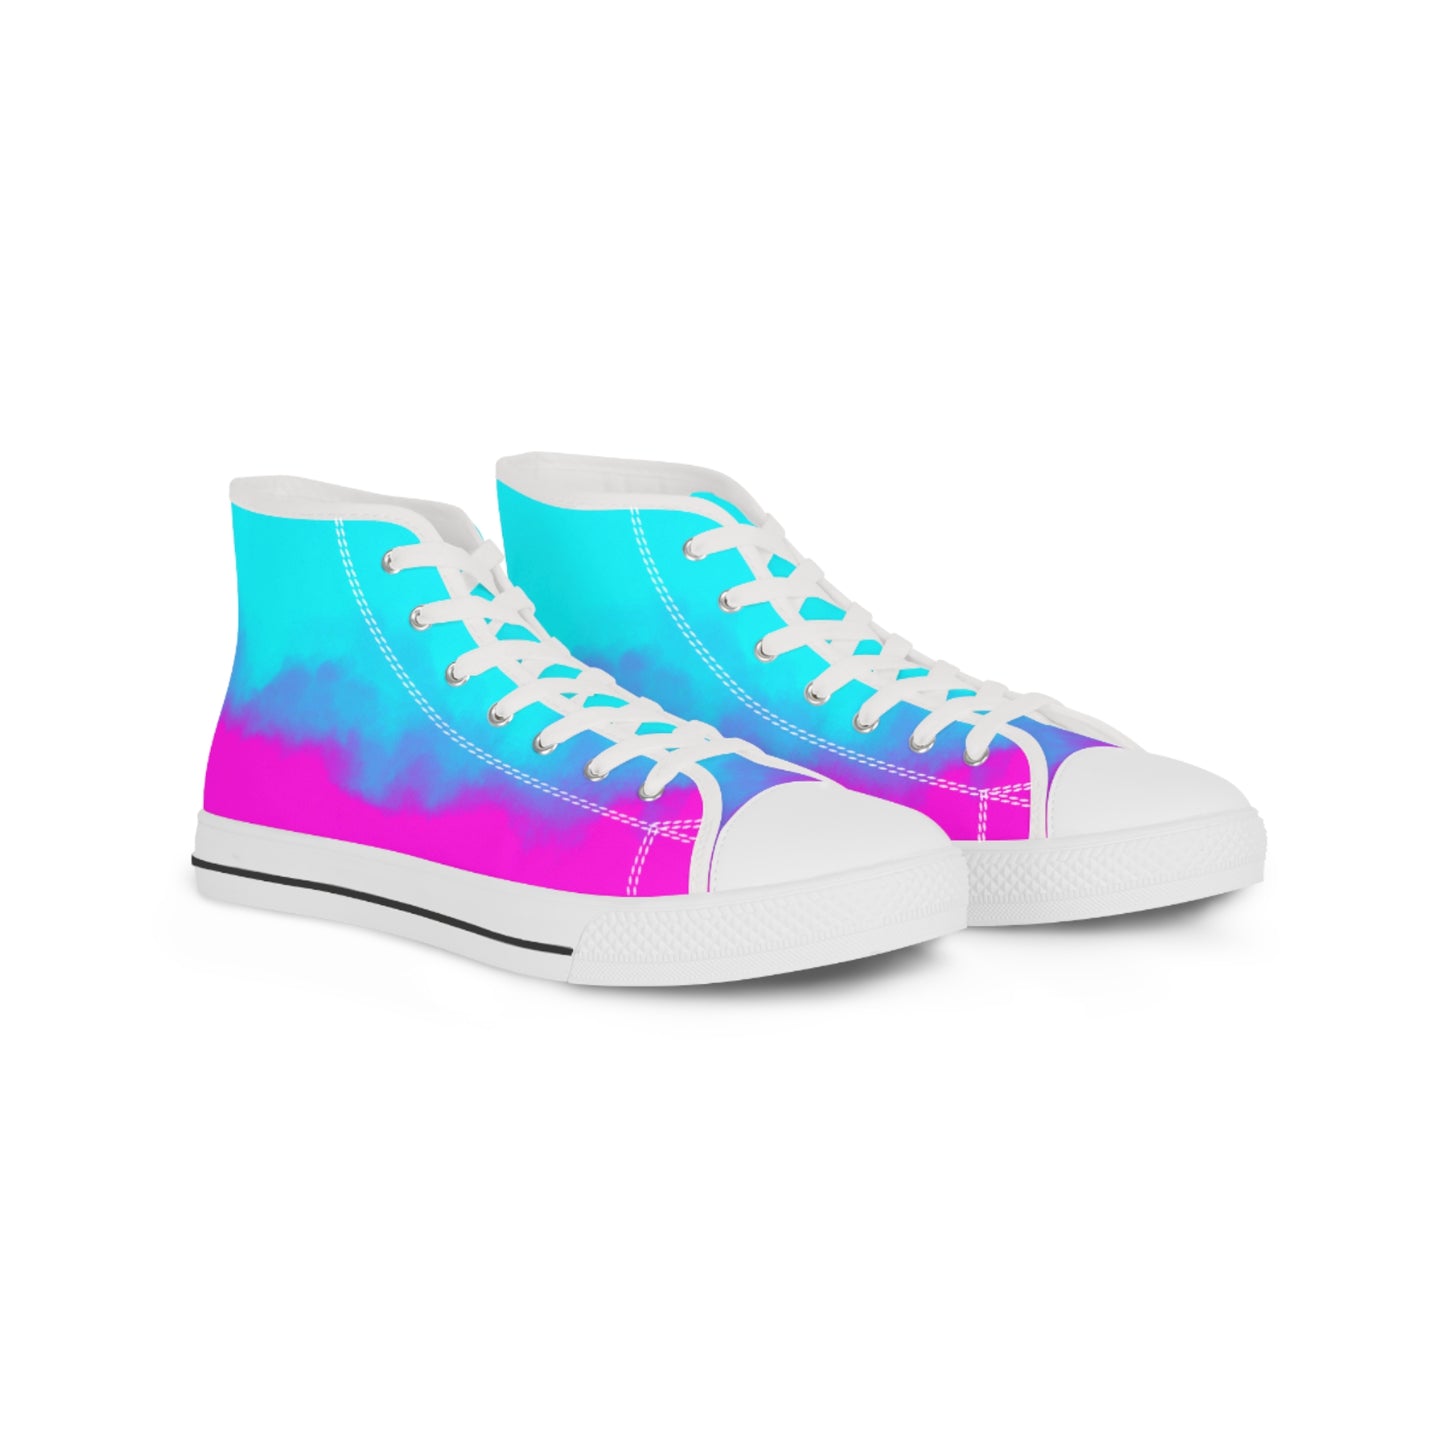 Limited Edition High Top Sneakers - Galaxy Divide